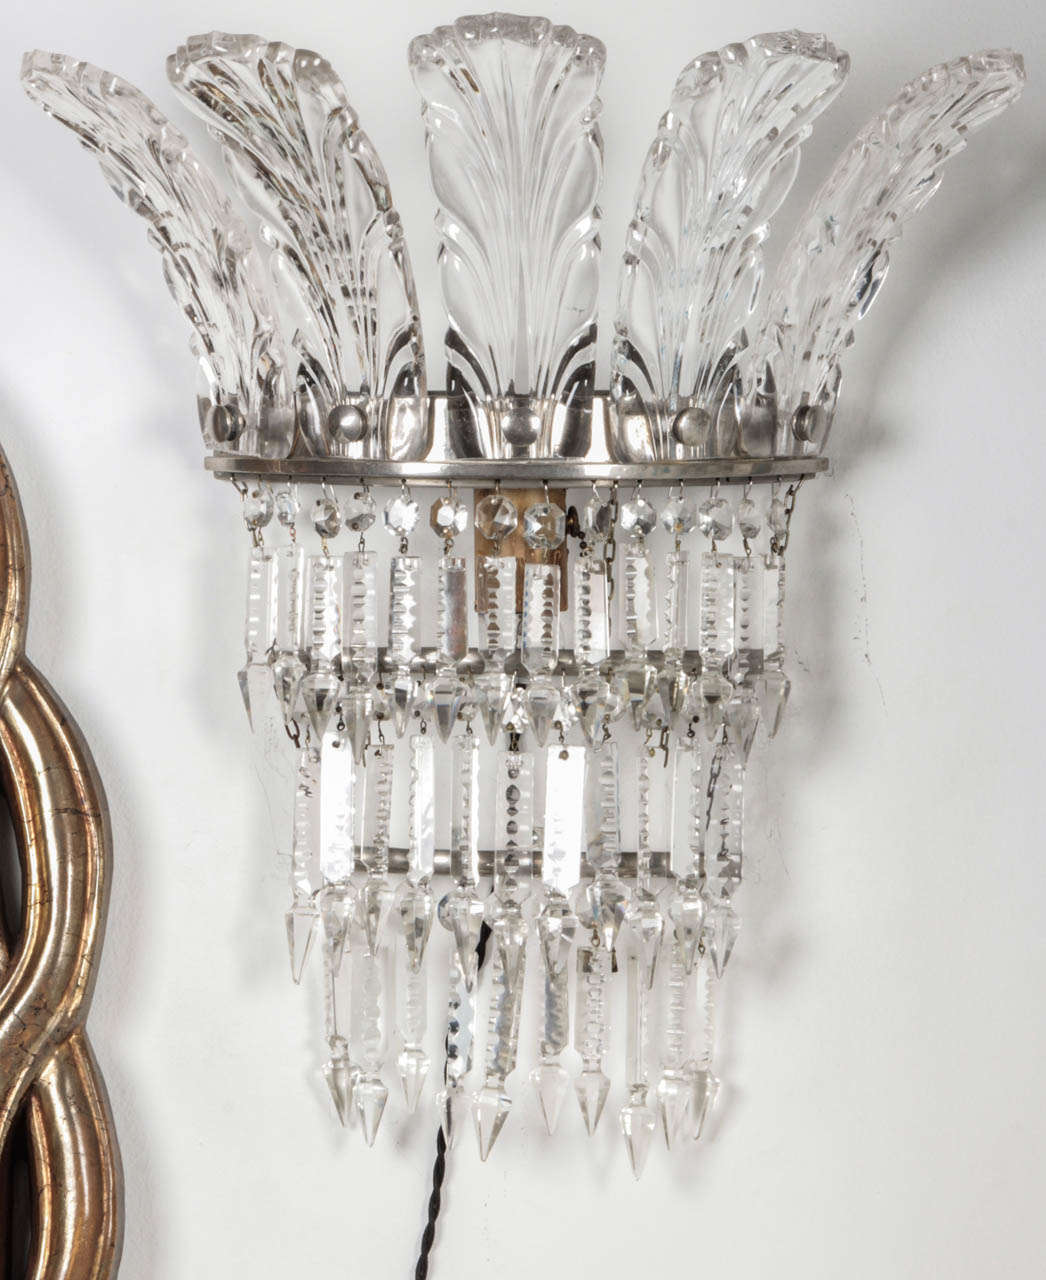 Pair of lead crystal and nickel three-teir sconces.  European, likely English, dating to the late 19th Century to early 20th Century.  Exceptional quality and craftsmanship.  Recently cleaned and restored; wired for U.S.